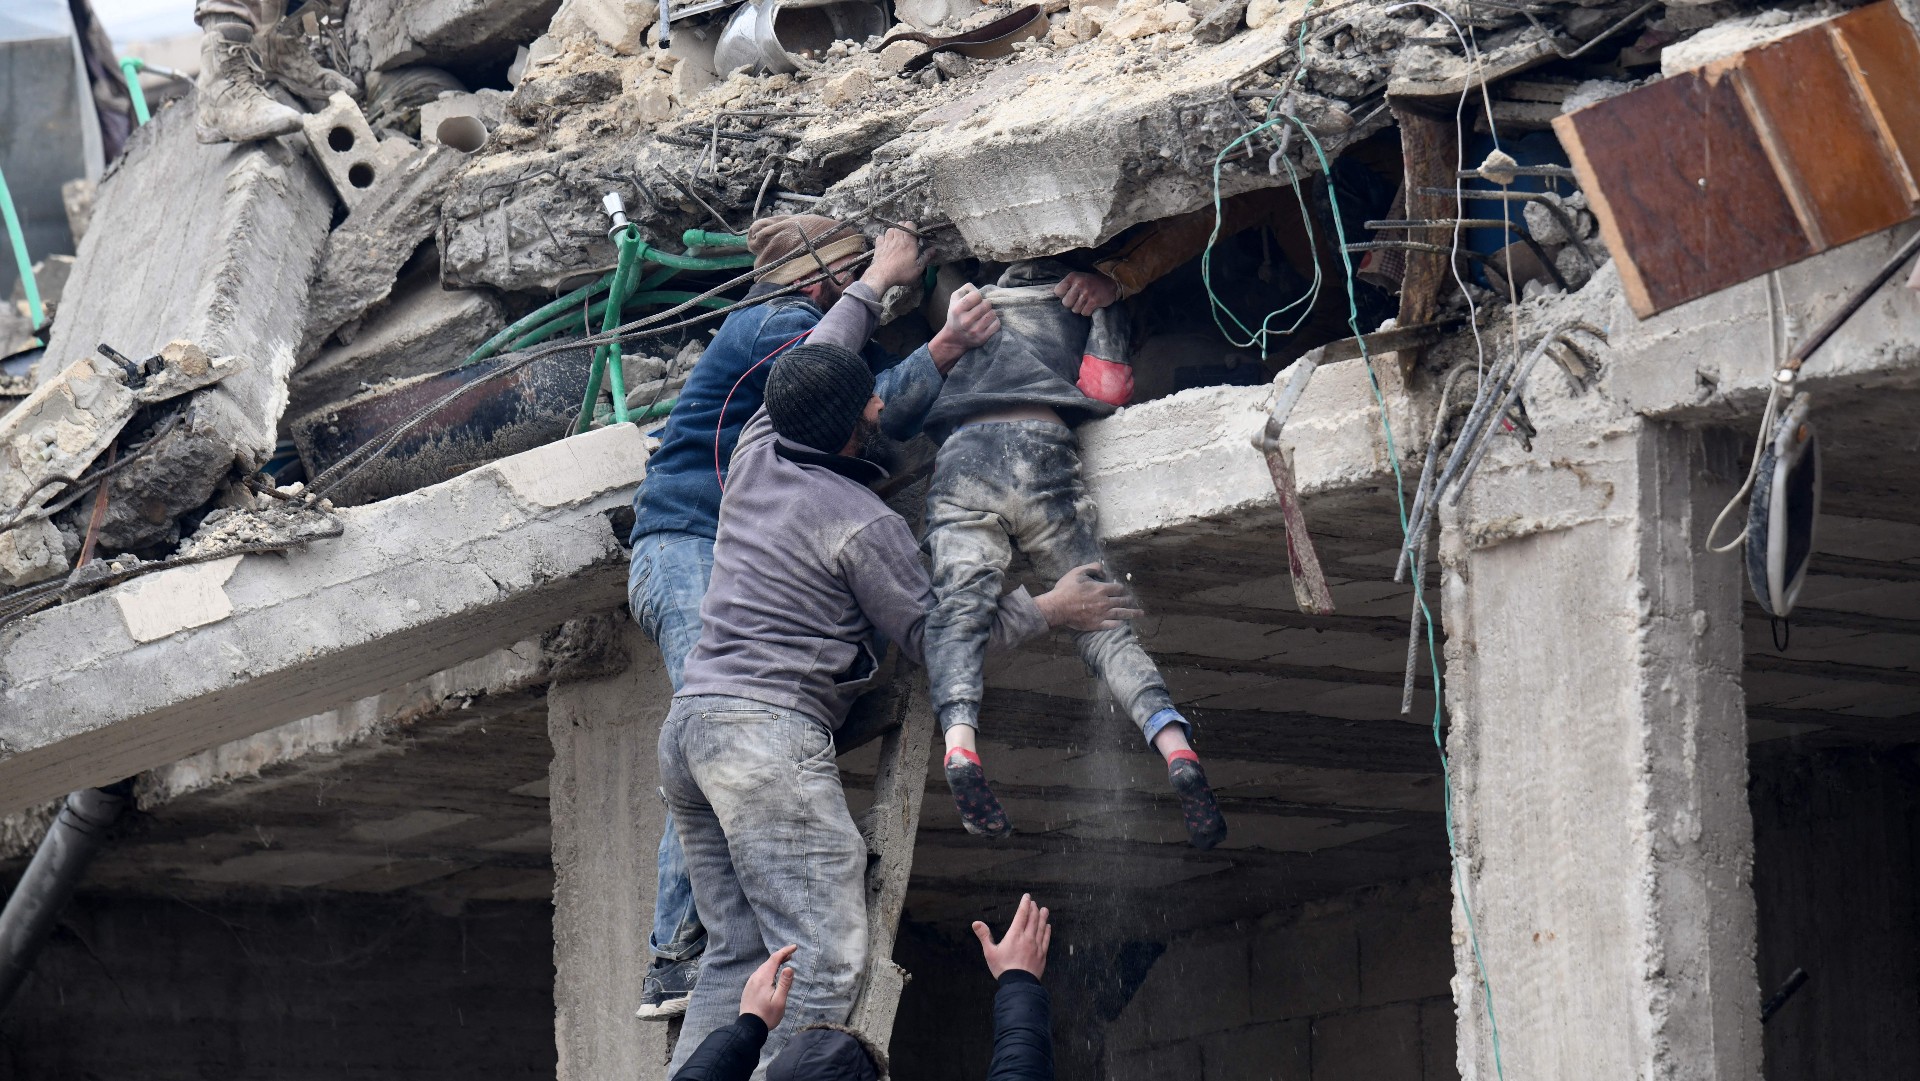 An injured girl is brought out of the rubble of a building in Jandaris, Syria